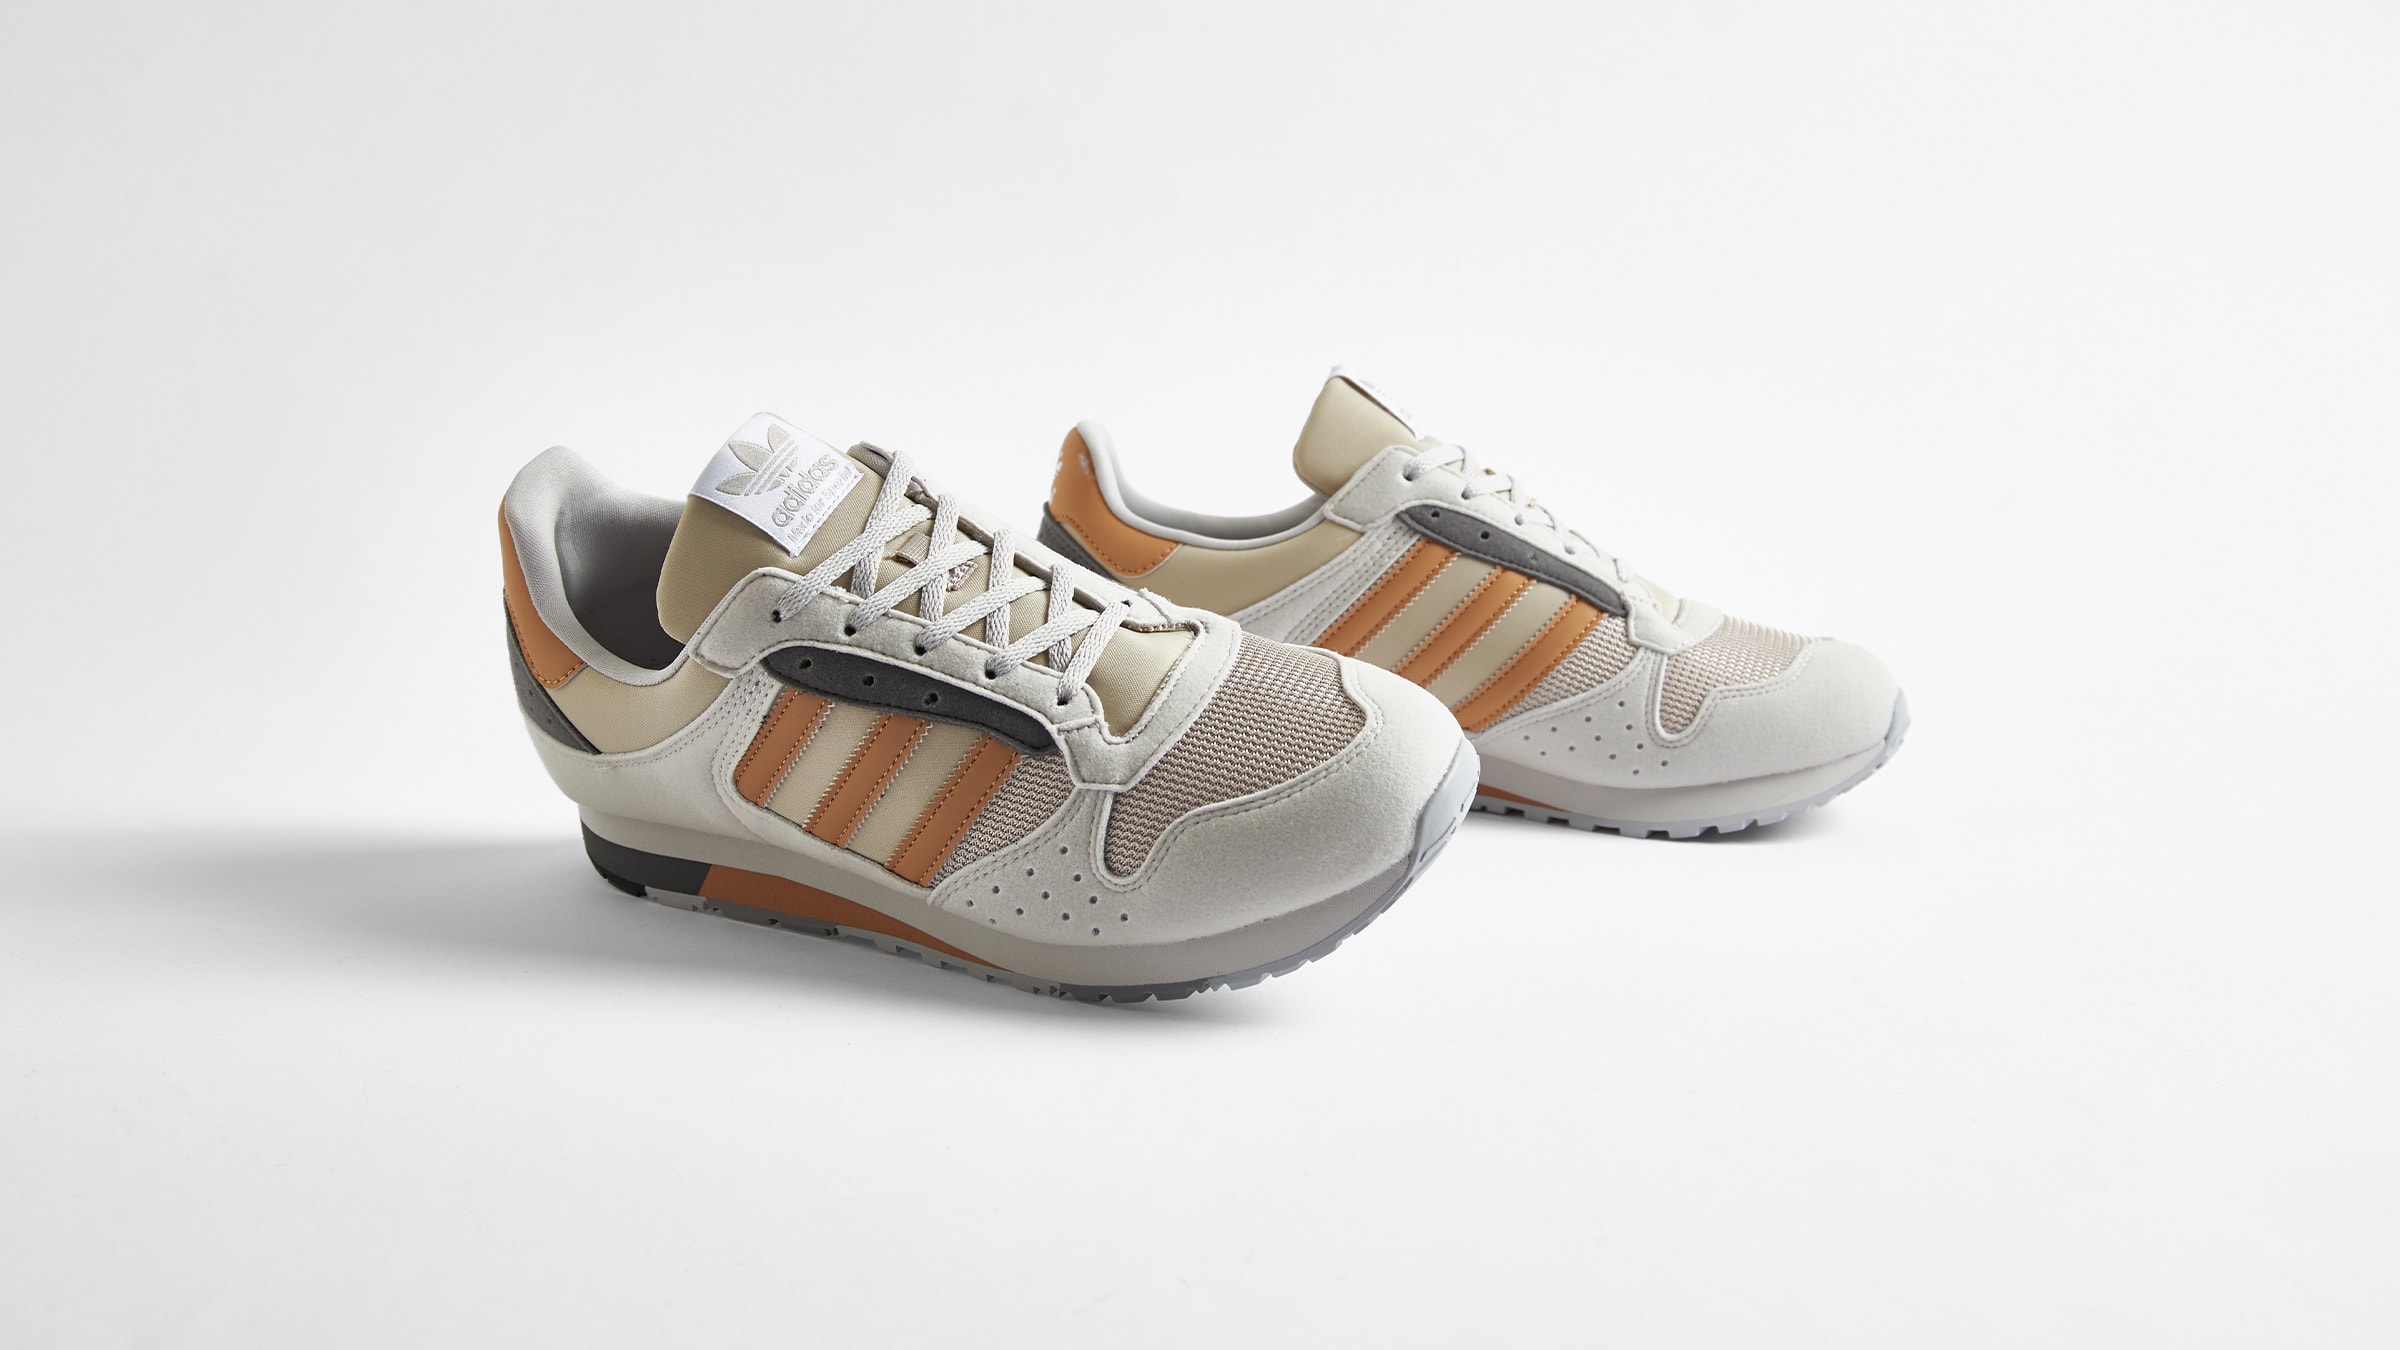 Adidas SPZL ZX 620 (Grey One & Grey Four) | END. Launches